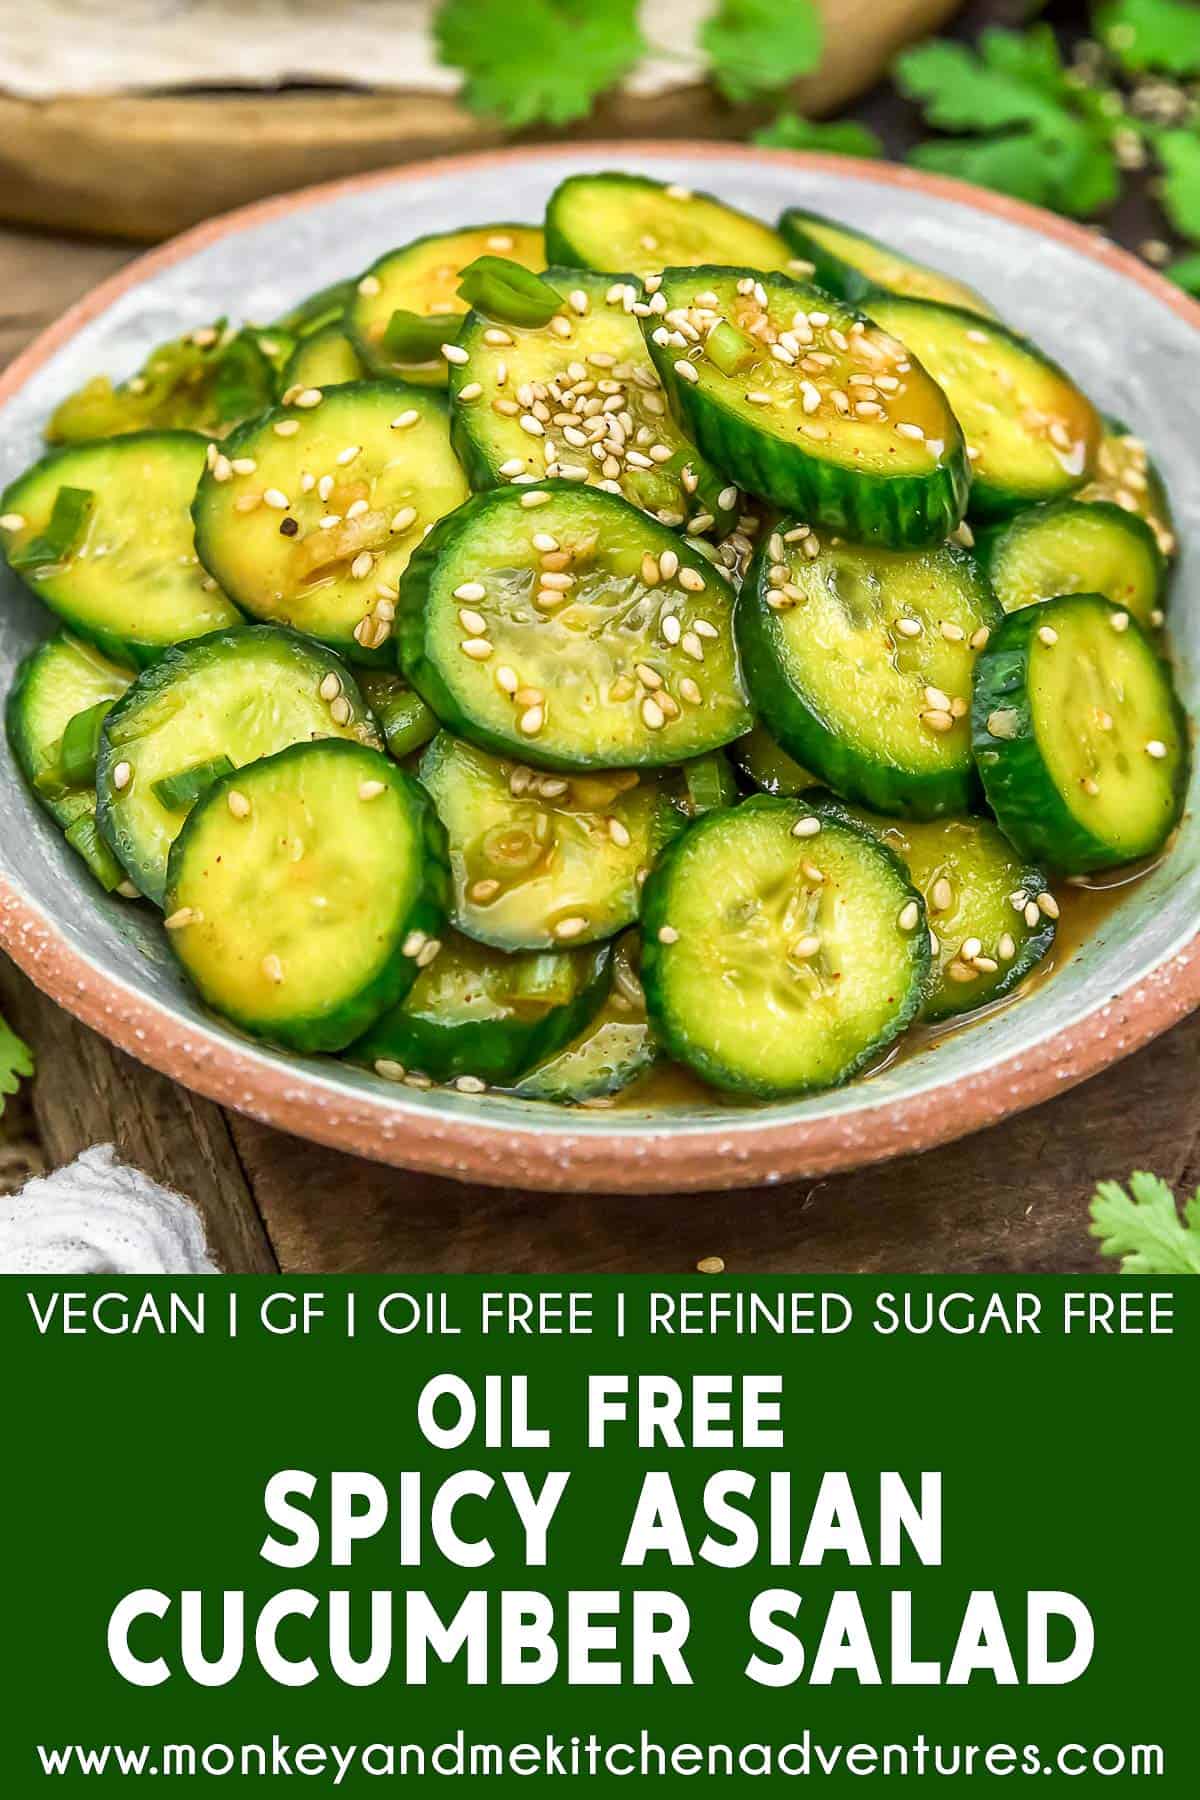 Oil Free Spicy Asian Cucumber Salad with text description